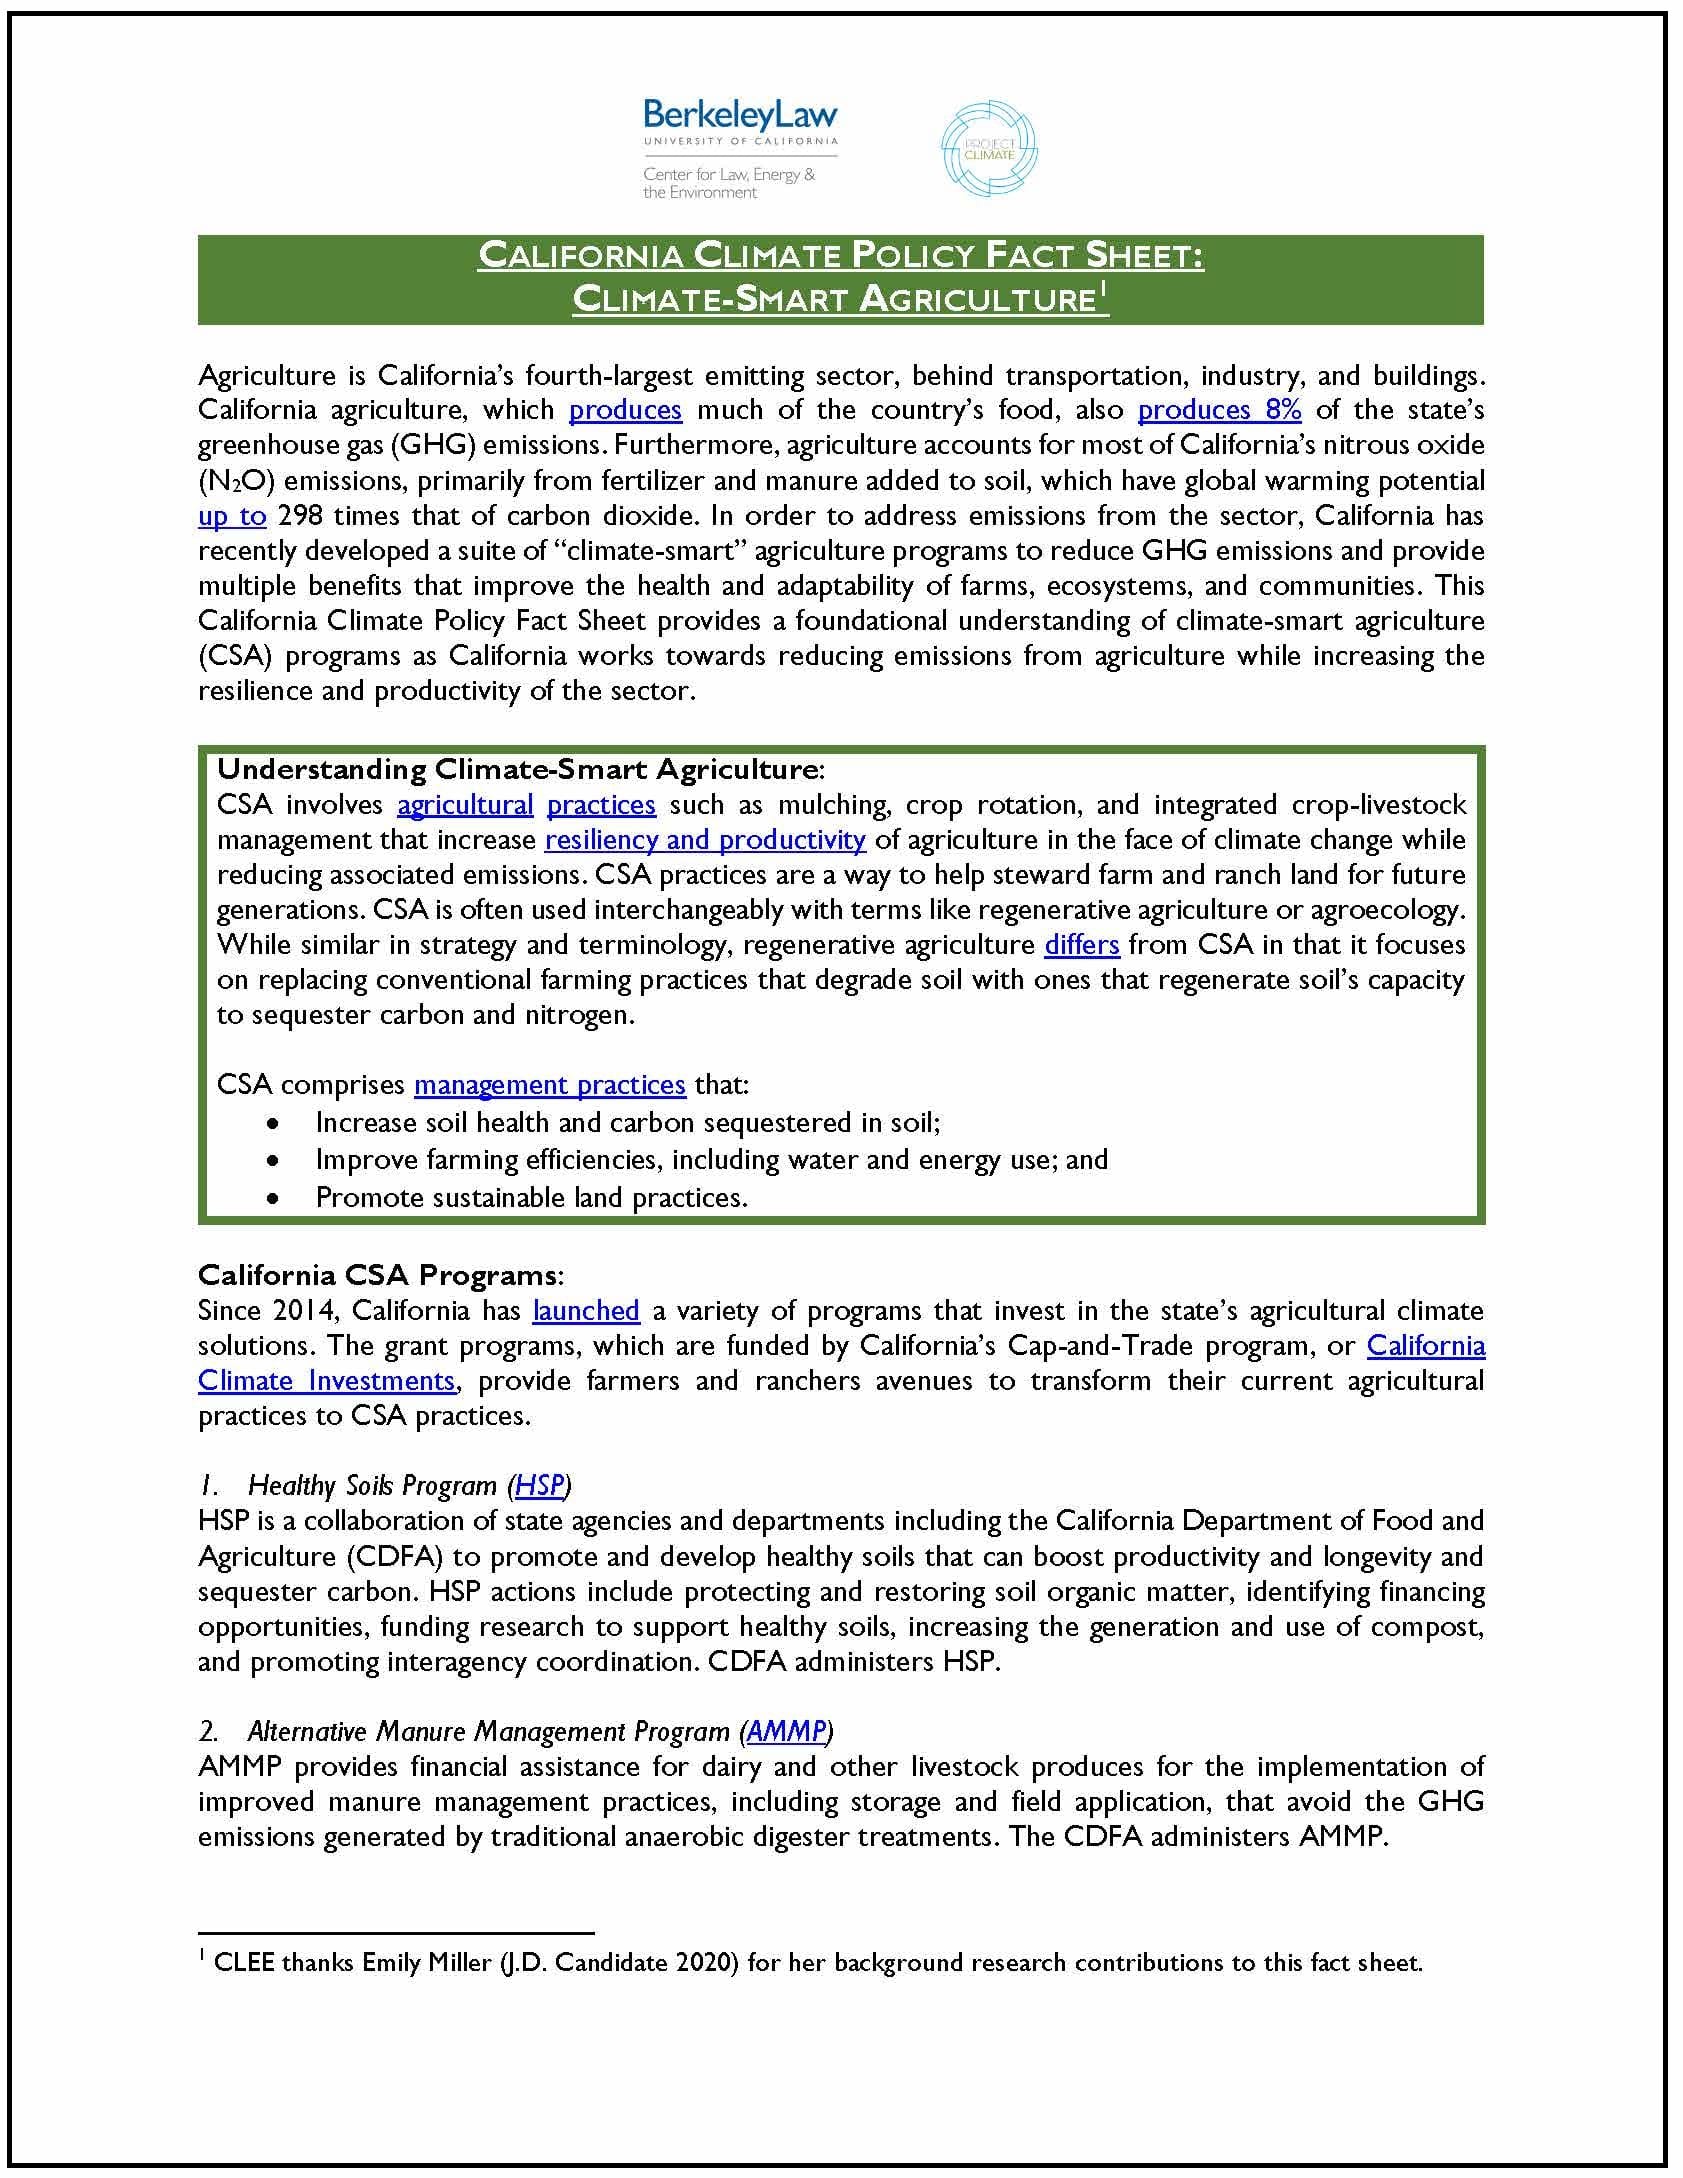 View PDF for Climate-Smart Agriculture